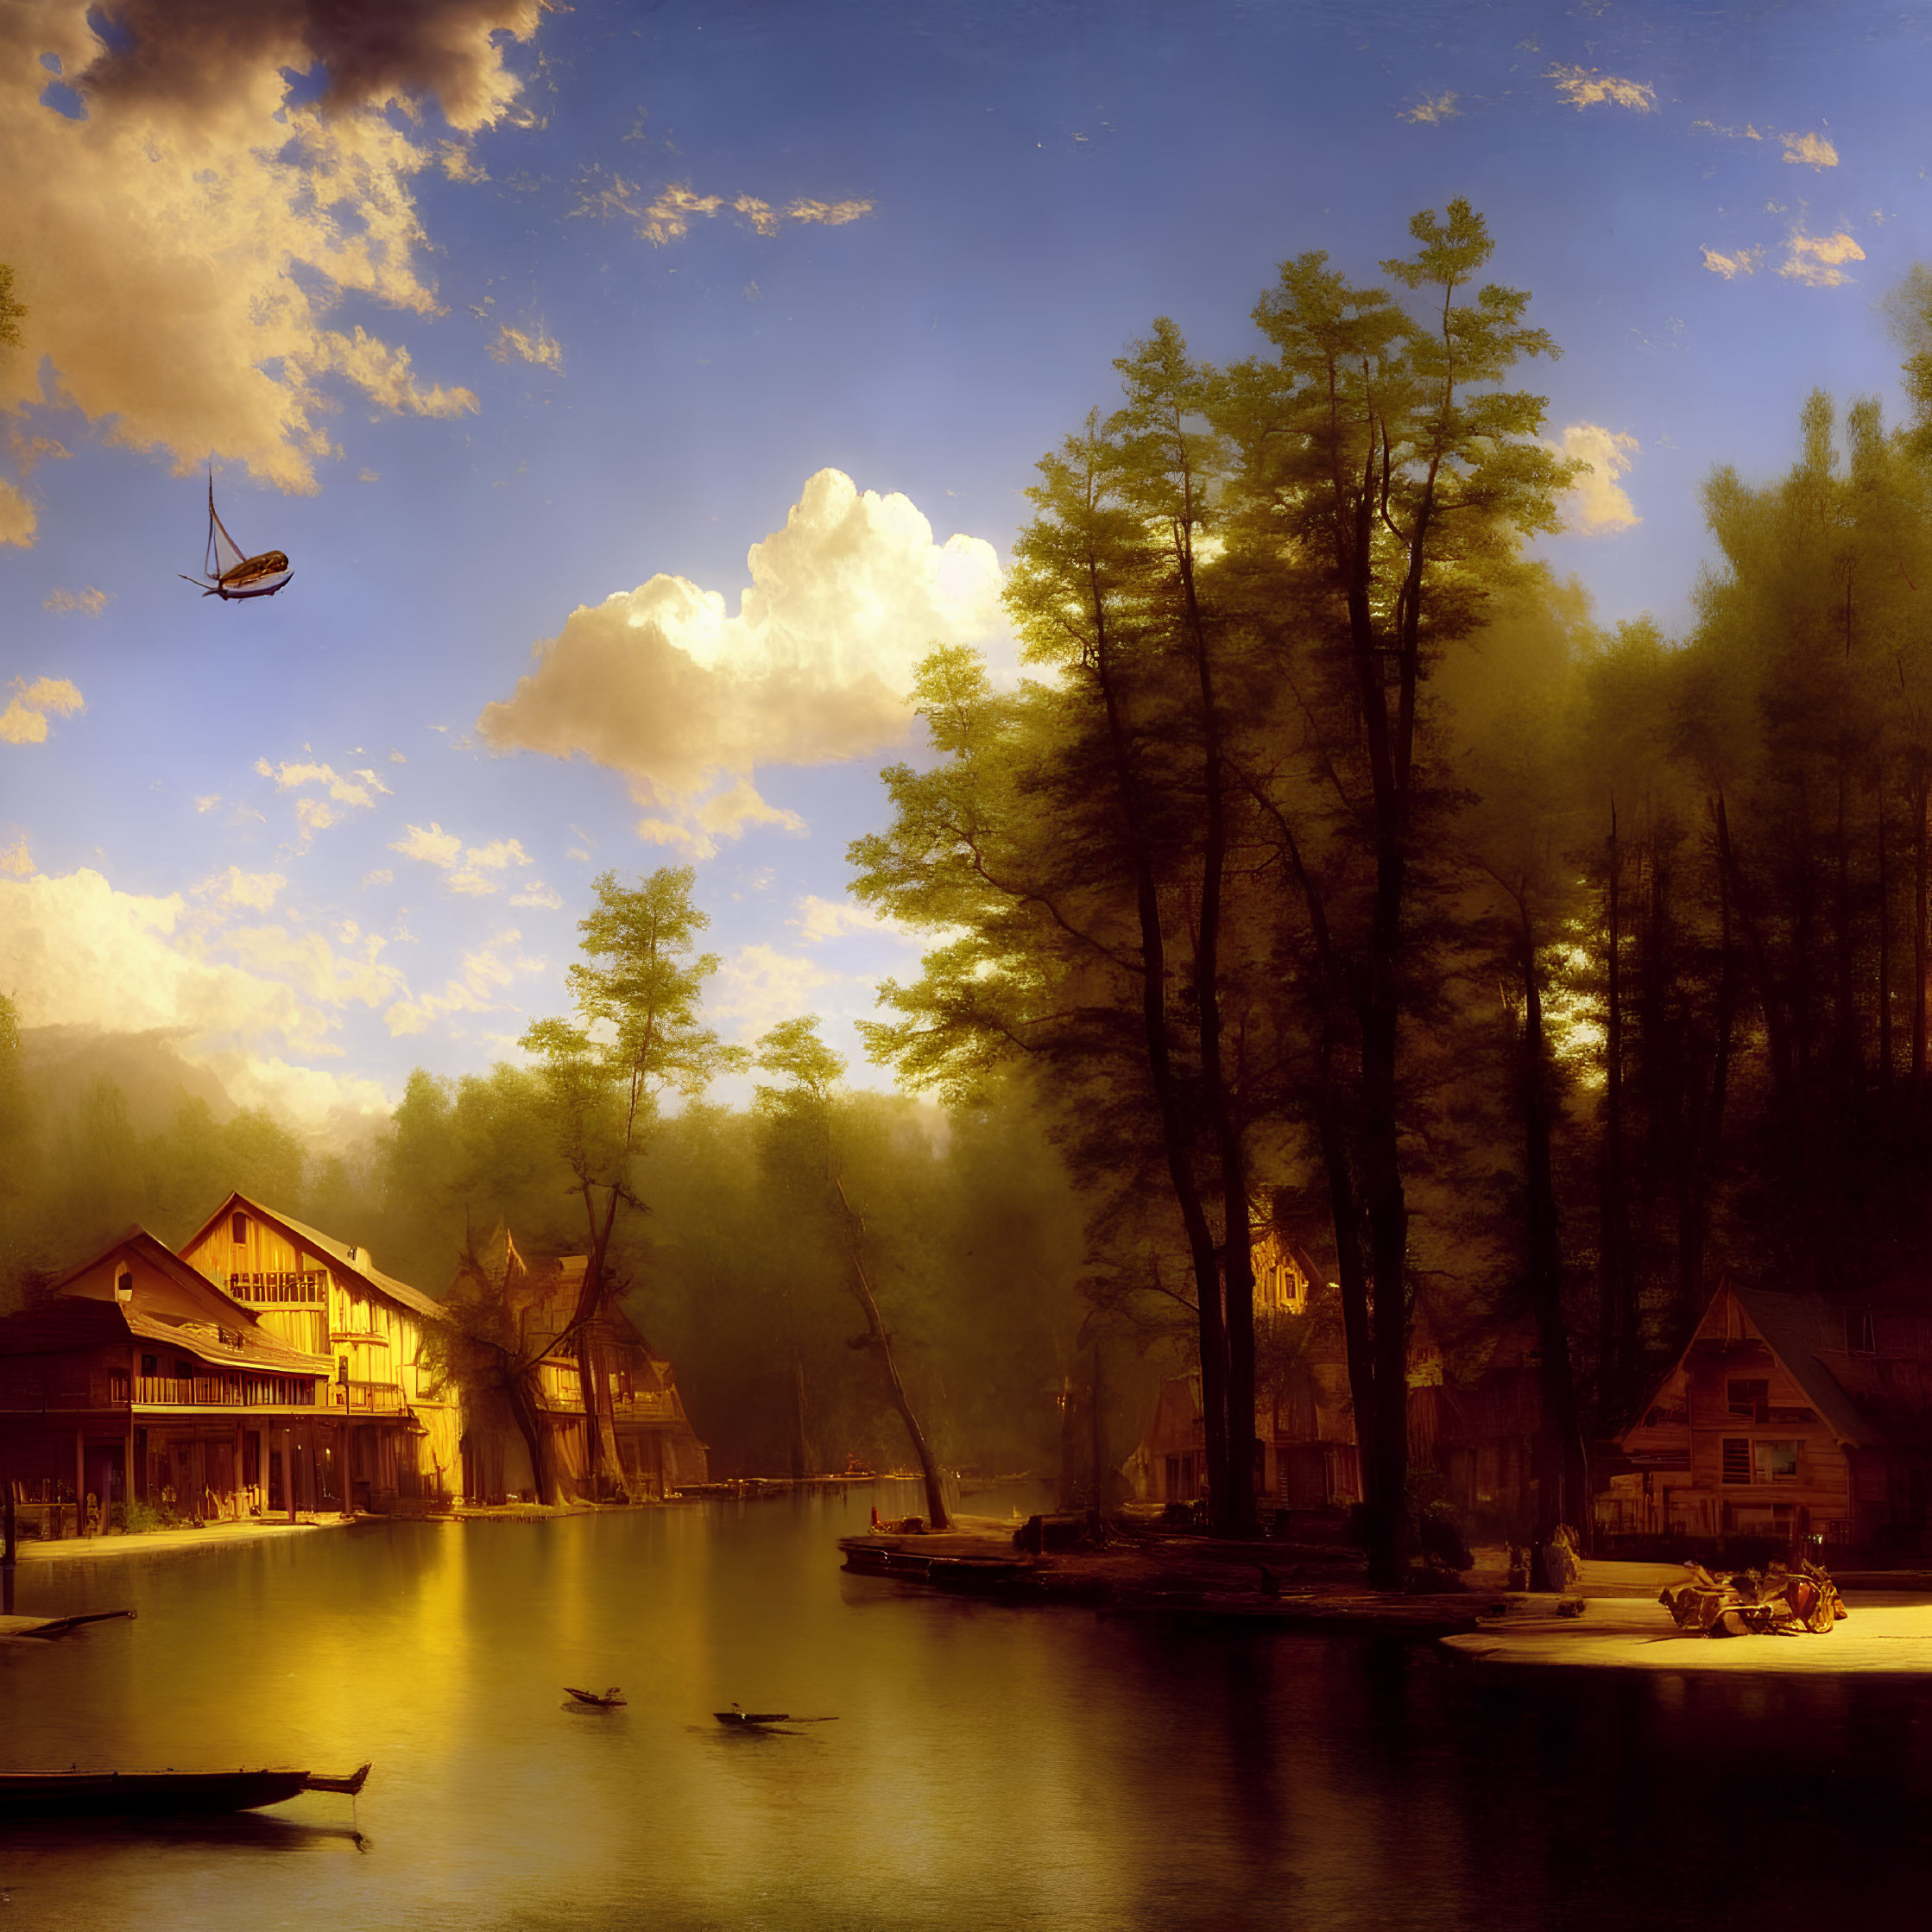 Tranquil lakeside with trees, houses, canoes, and hot air balloon at sunset